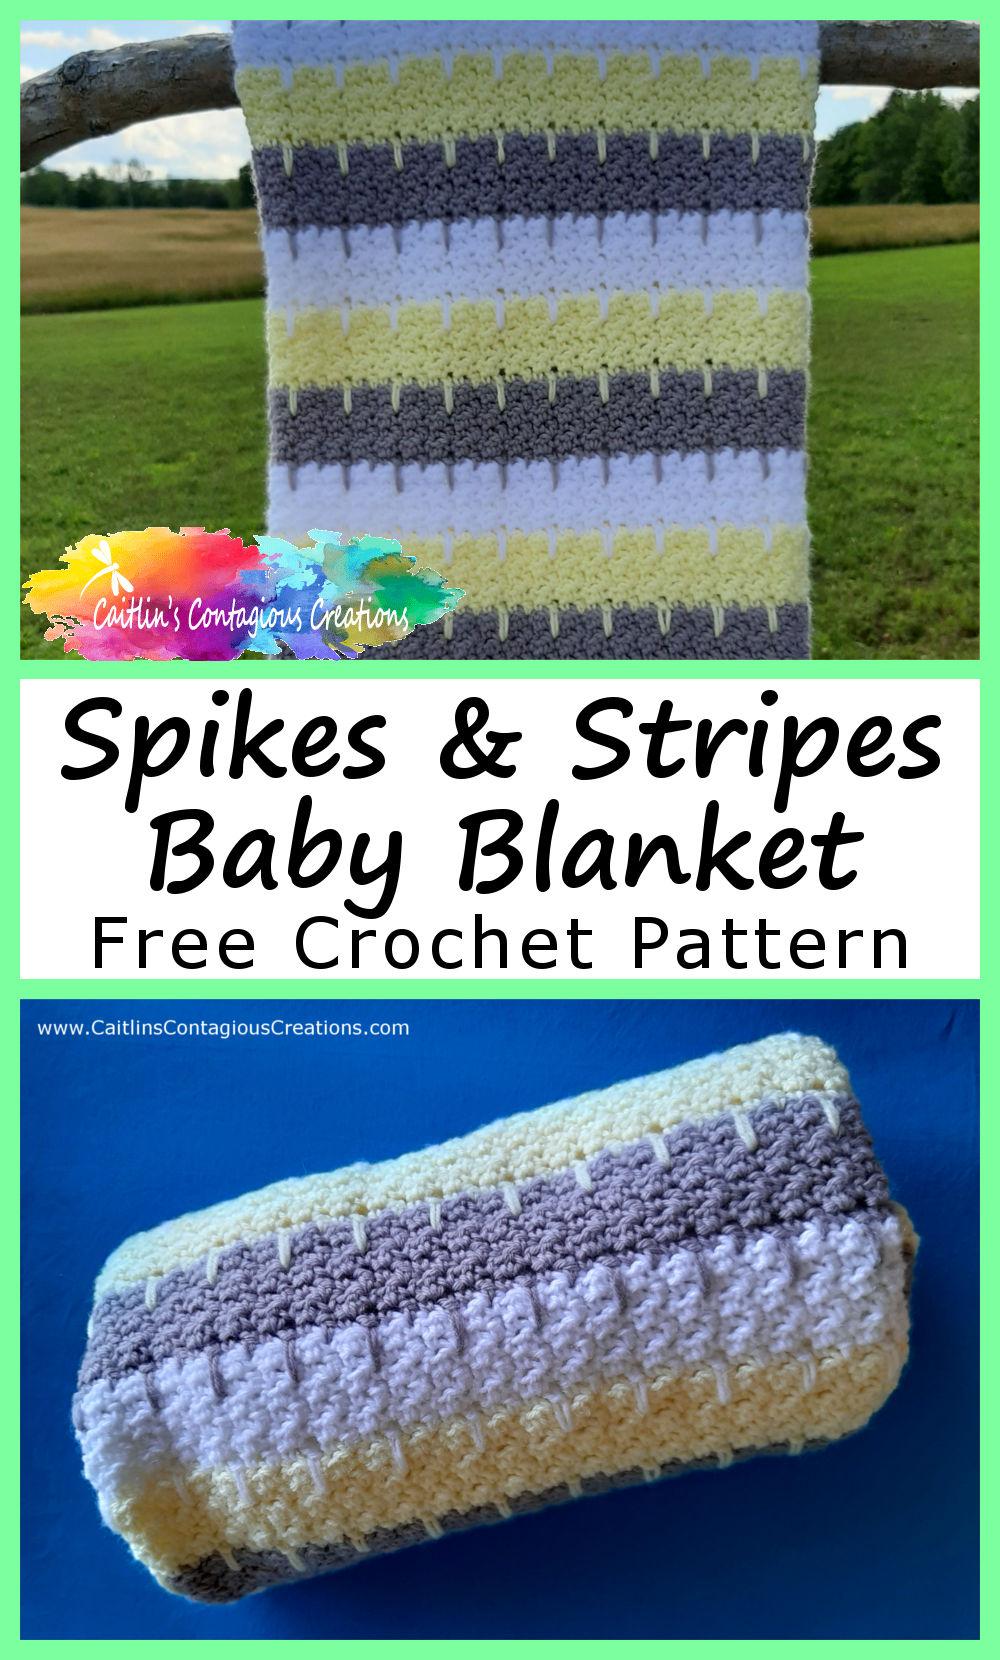 rolled up blanket and hanging blanket with text overlay striped and spikes baby blanket free crochet pattern